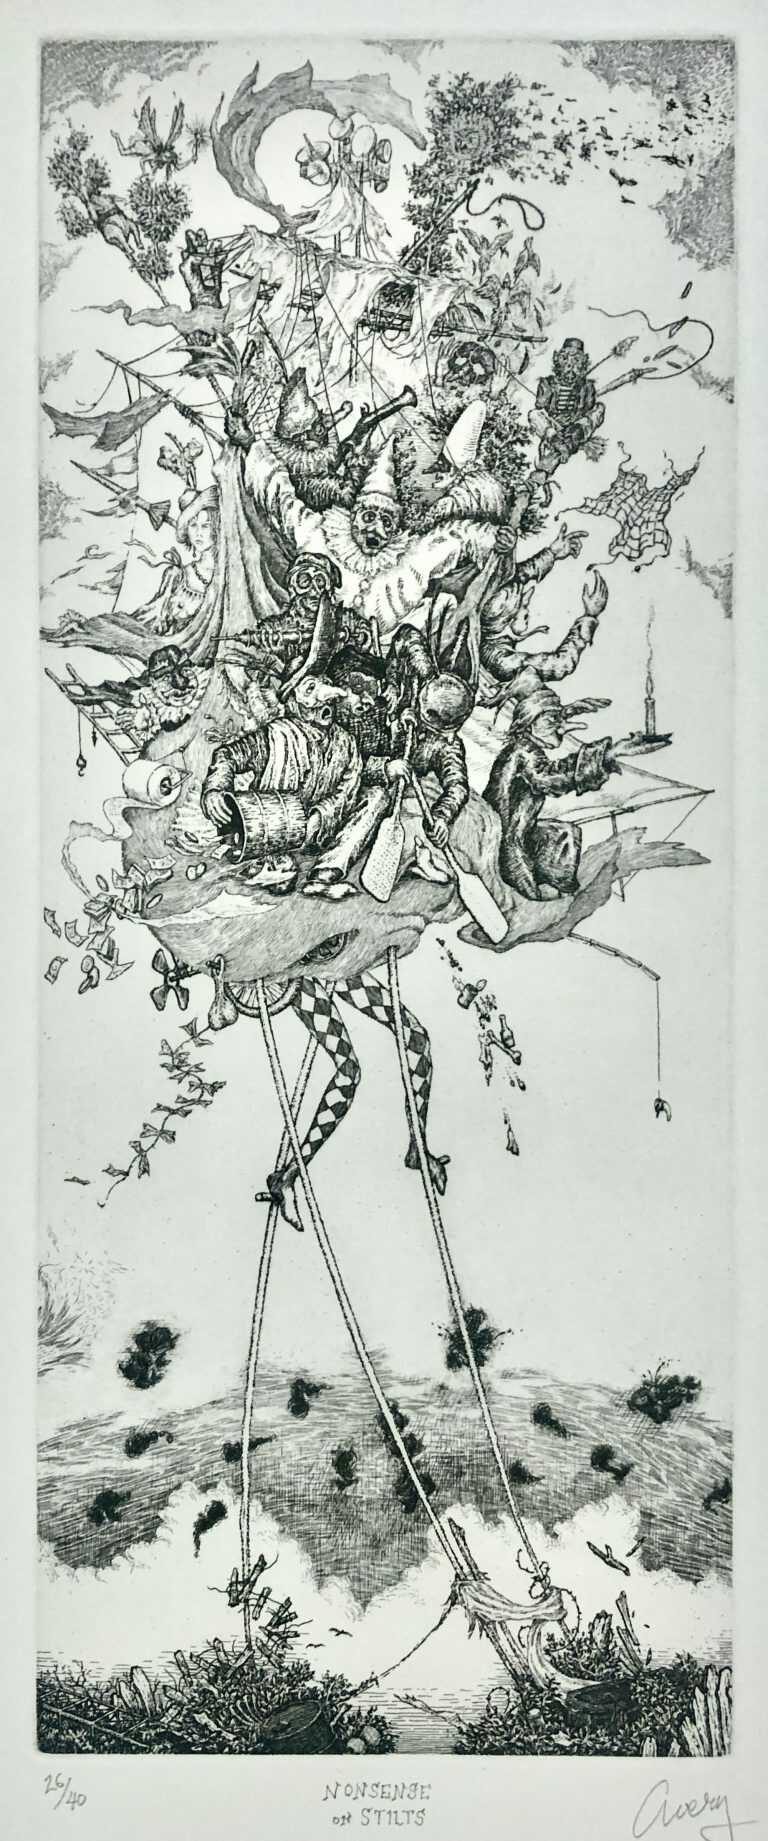 Print by David Avery: Nonsense on Stilts, available at Childs Gallery, Boston